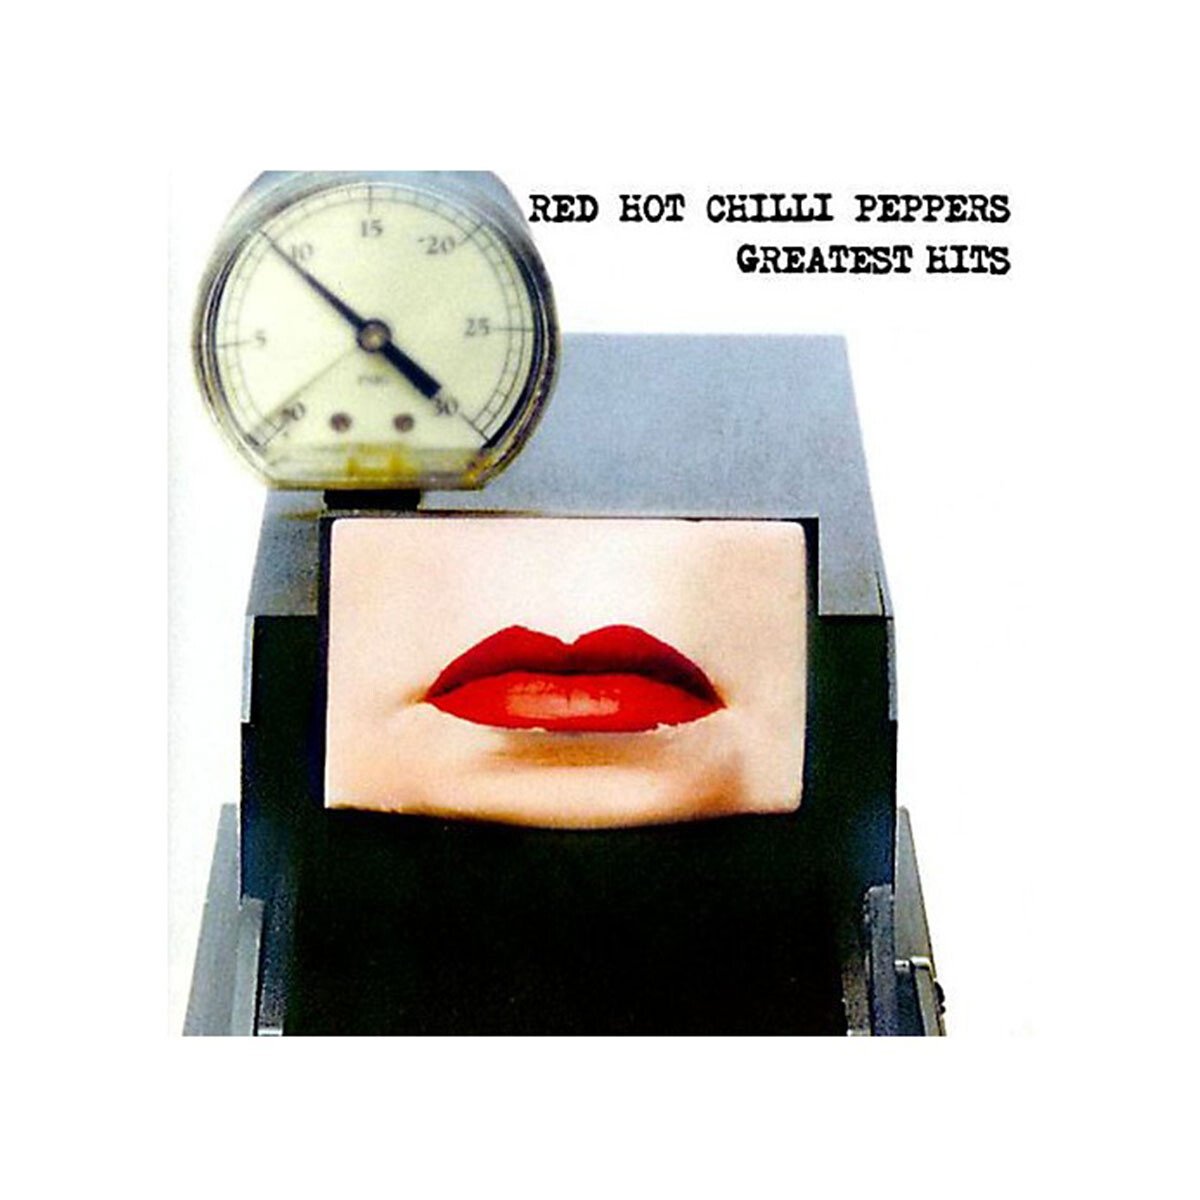 Red Hot Chili Peppers-greatest Hits (arg) - Cd 